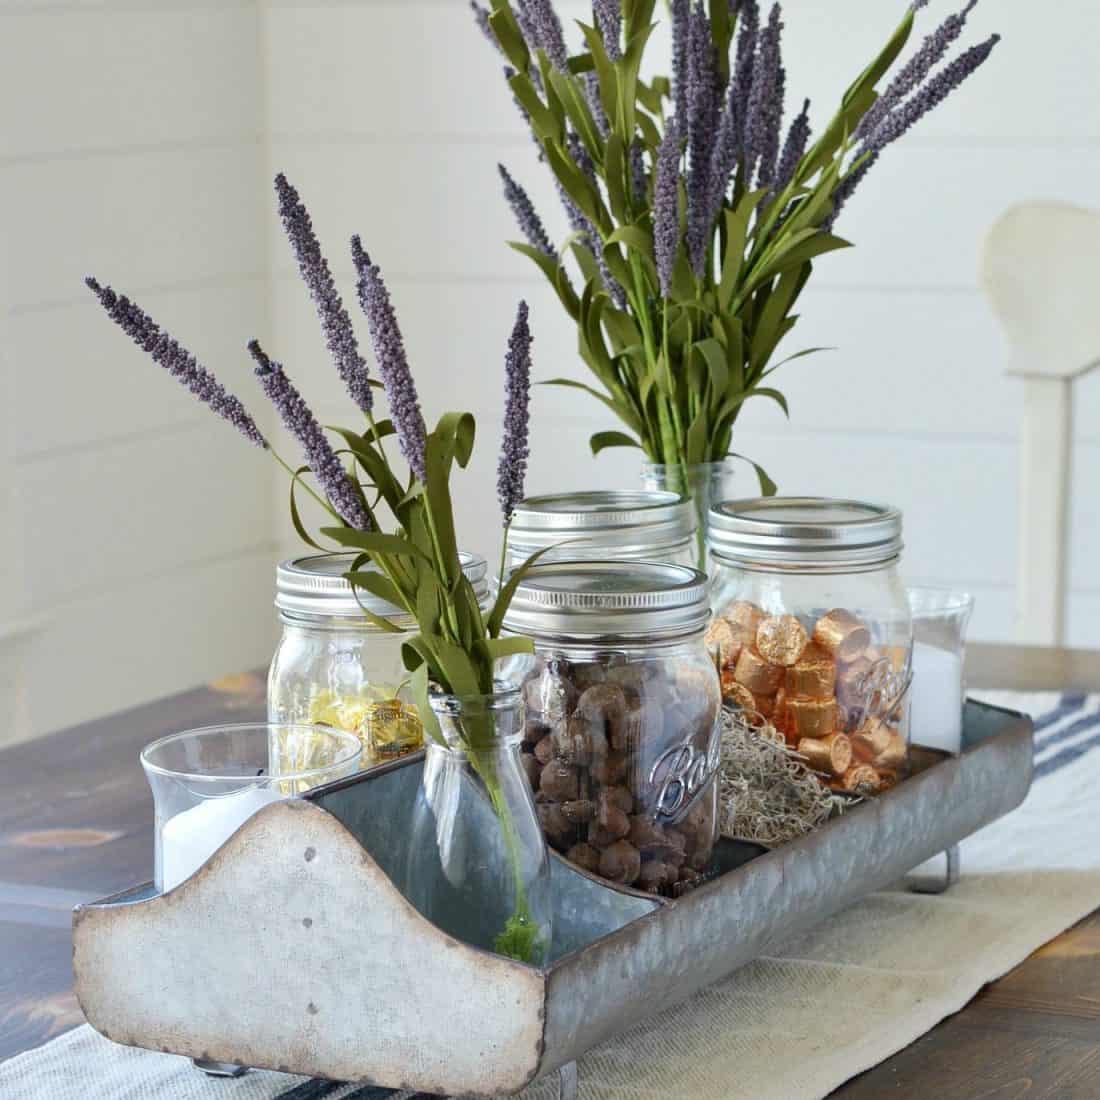 galvanized farmhouse style tray as table centerpiece holding candy, flowers and candle